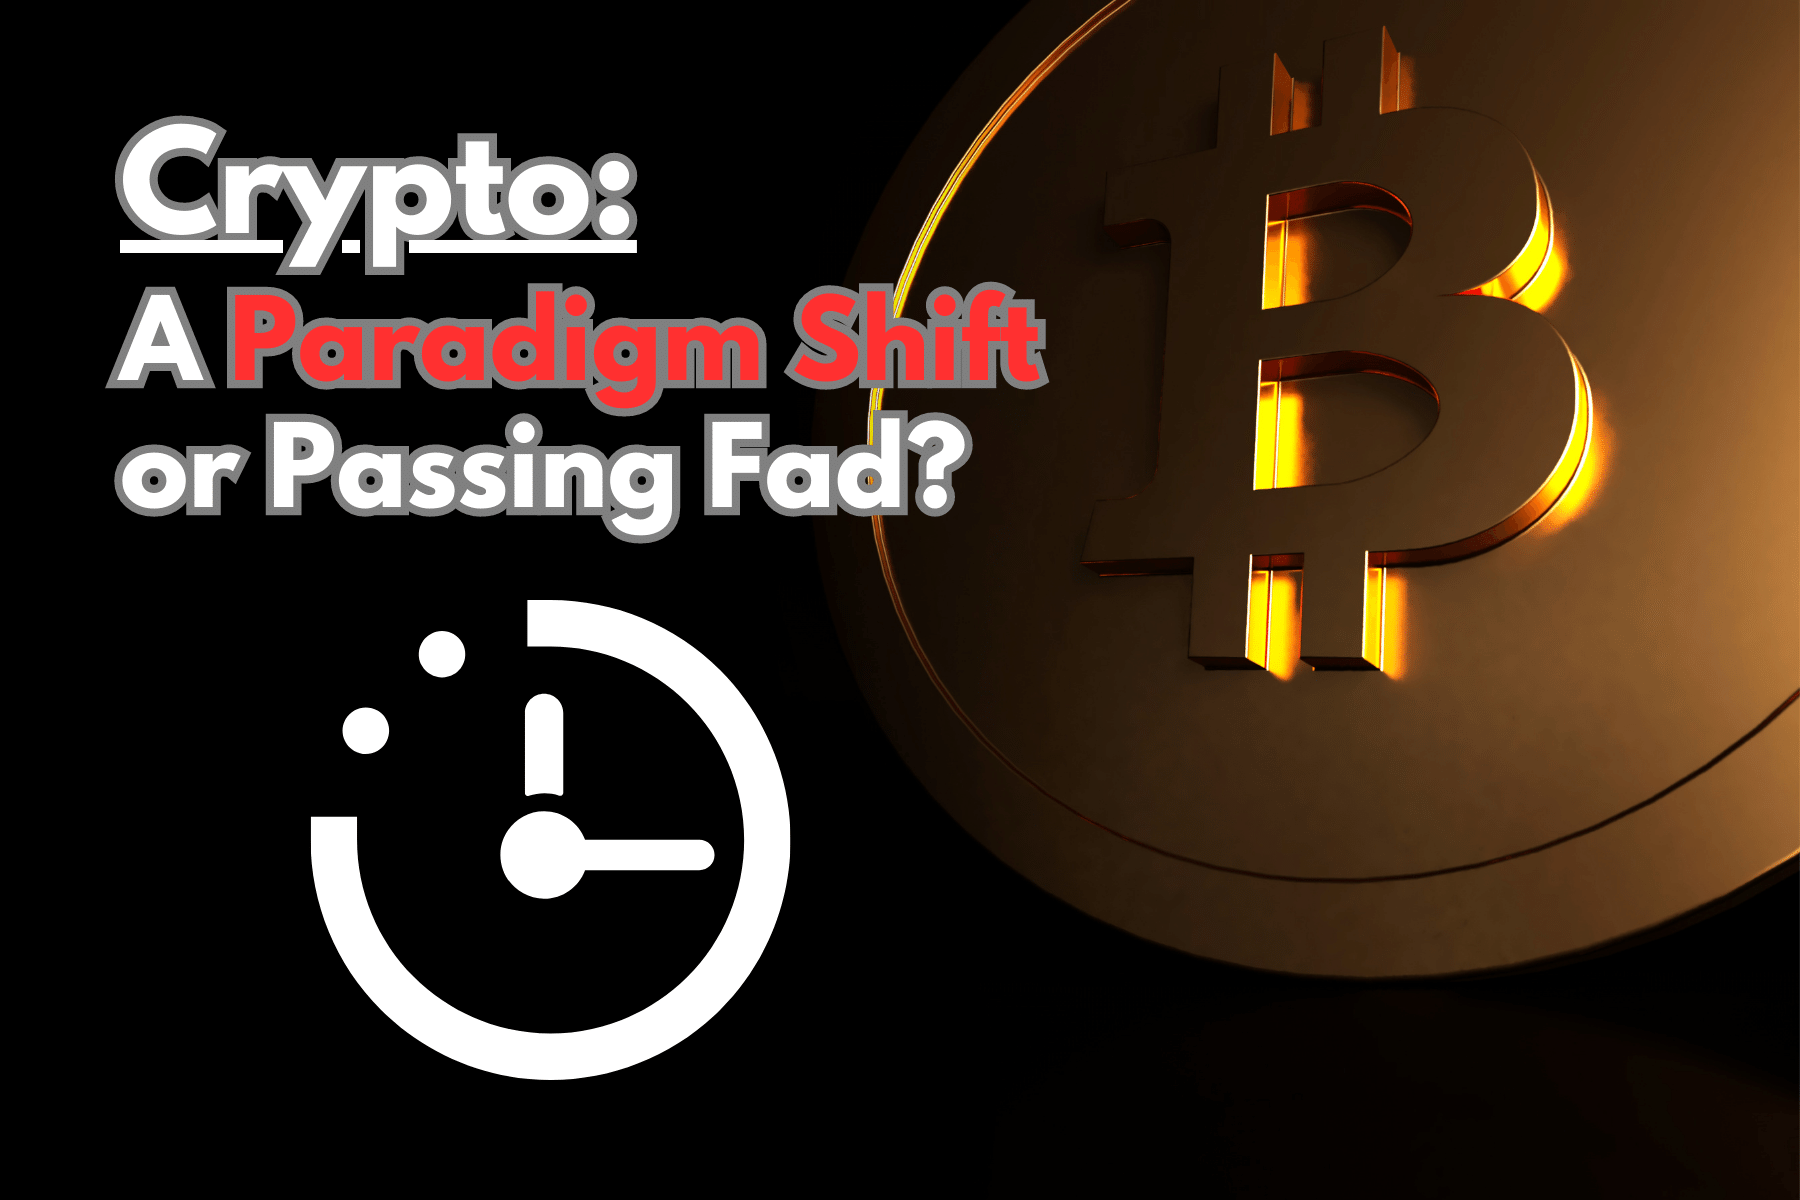 The Long-Term Prospects of Cryptocurrency: A Paradigm Shift or Passing Fad?